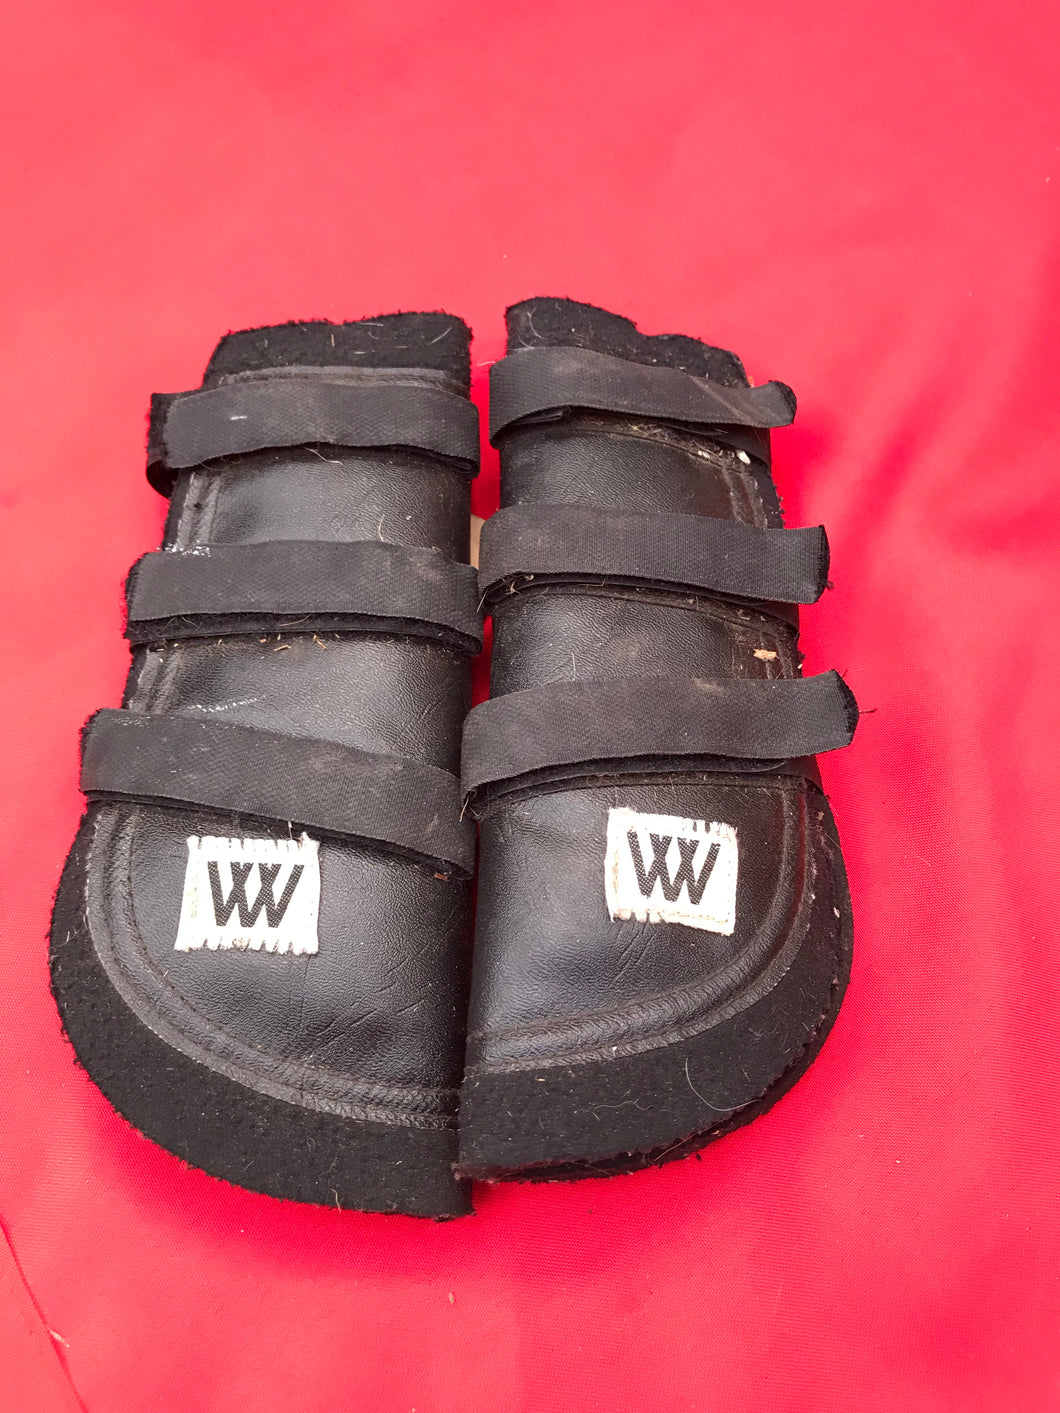 Woof wear boots brushing boots pony/cob FREE POSTAGE